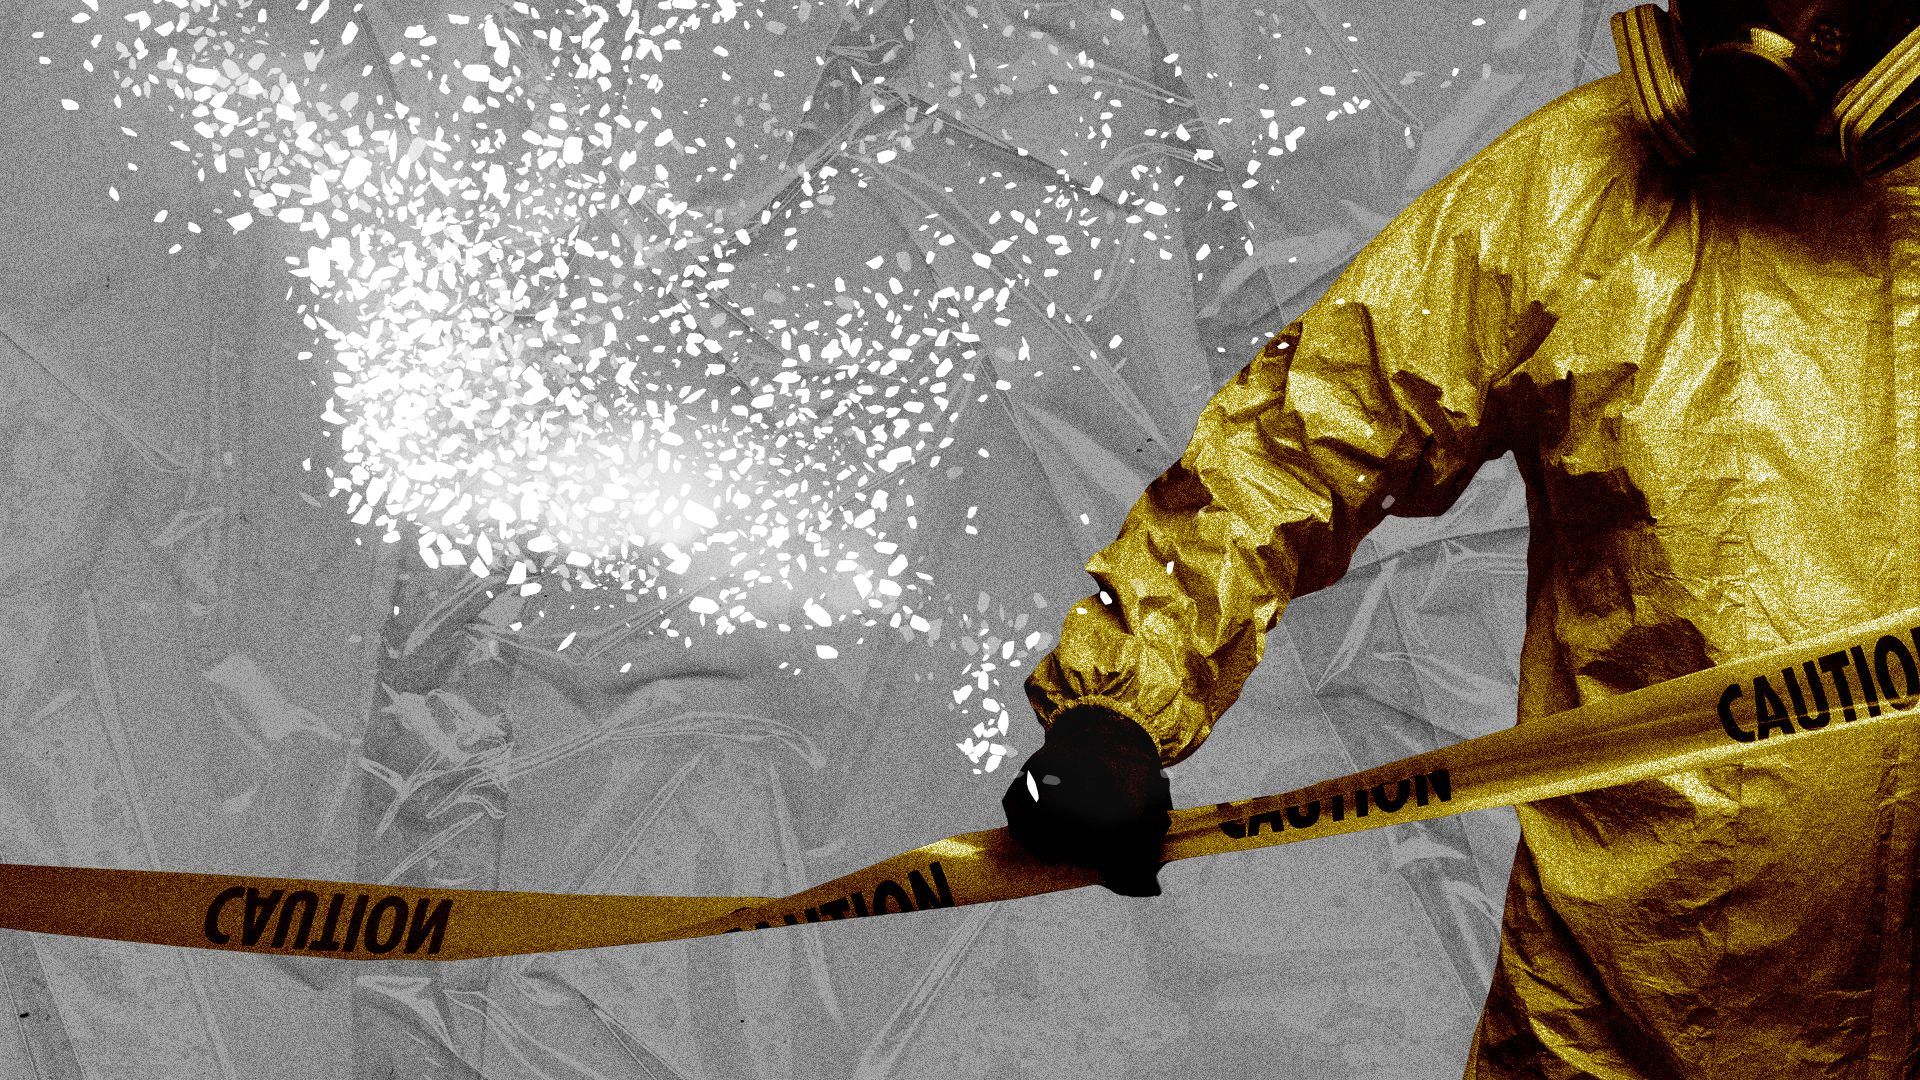 Photo illustration of a person in a hazmat suit holding caution tape in front of an abstract background of crystal particles.